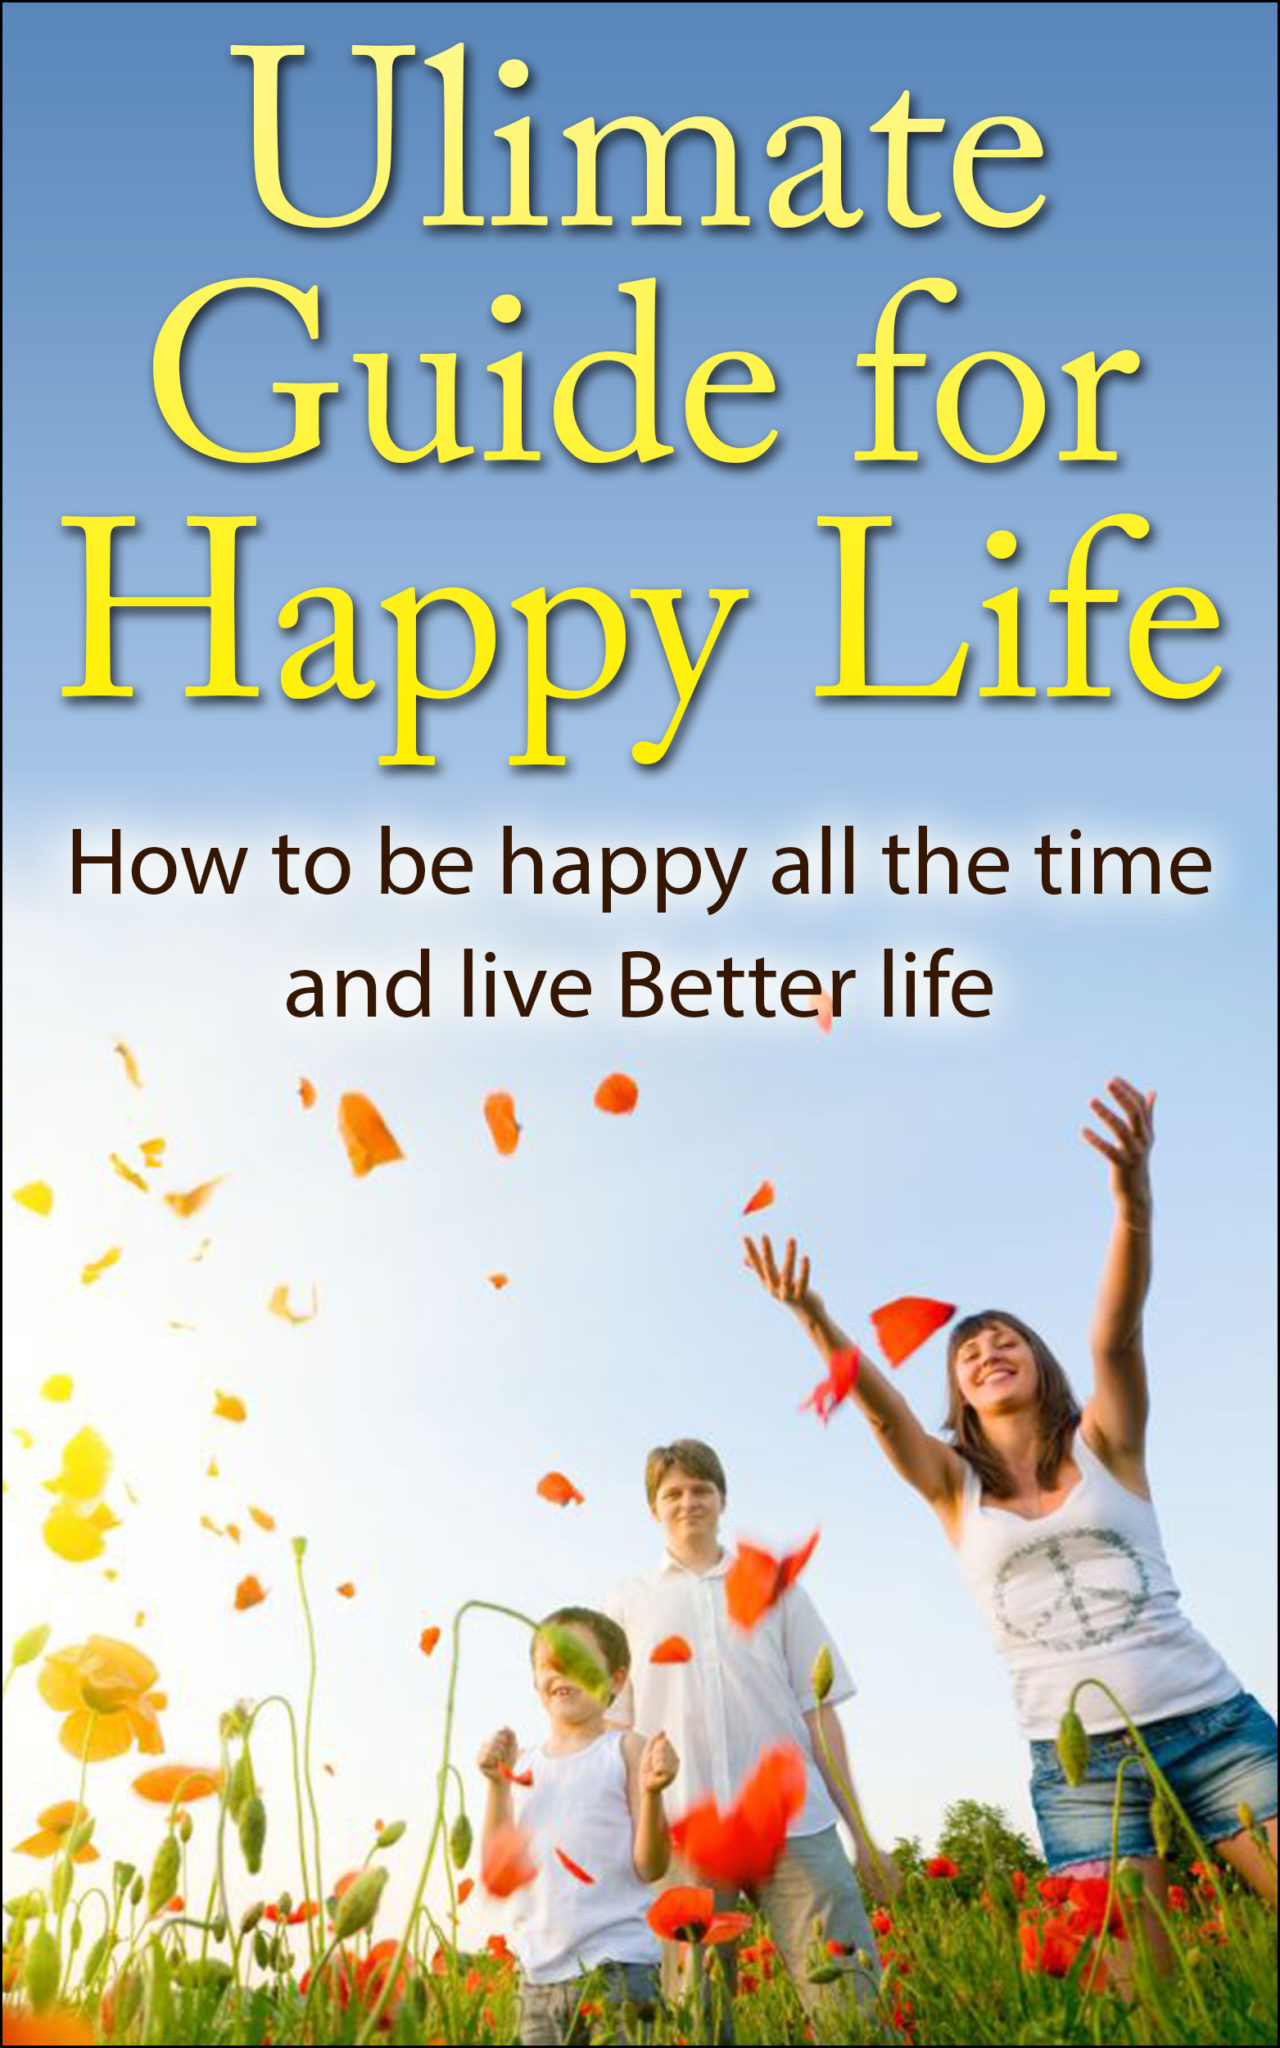 Ultimate Guide for Happy Life: How to be Happy All the Time and Live Better Life by BOB SMITH